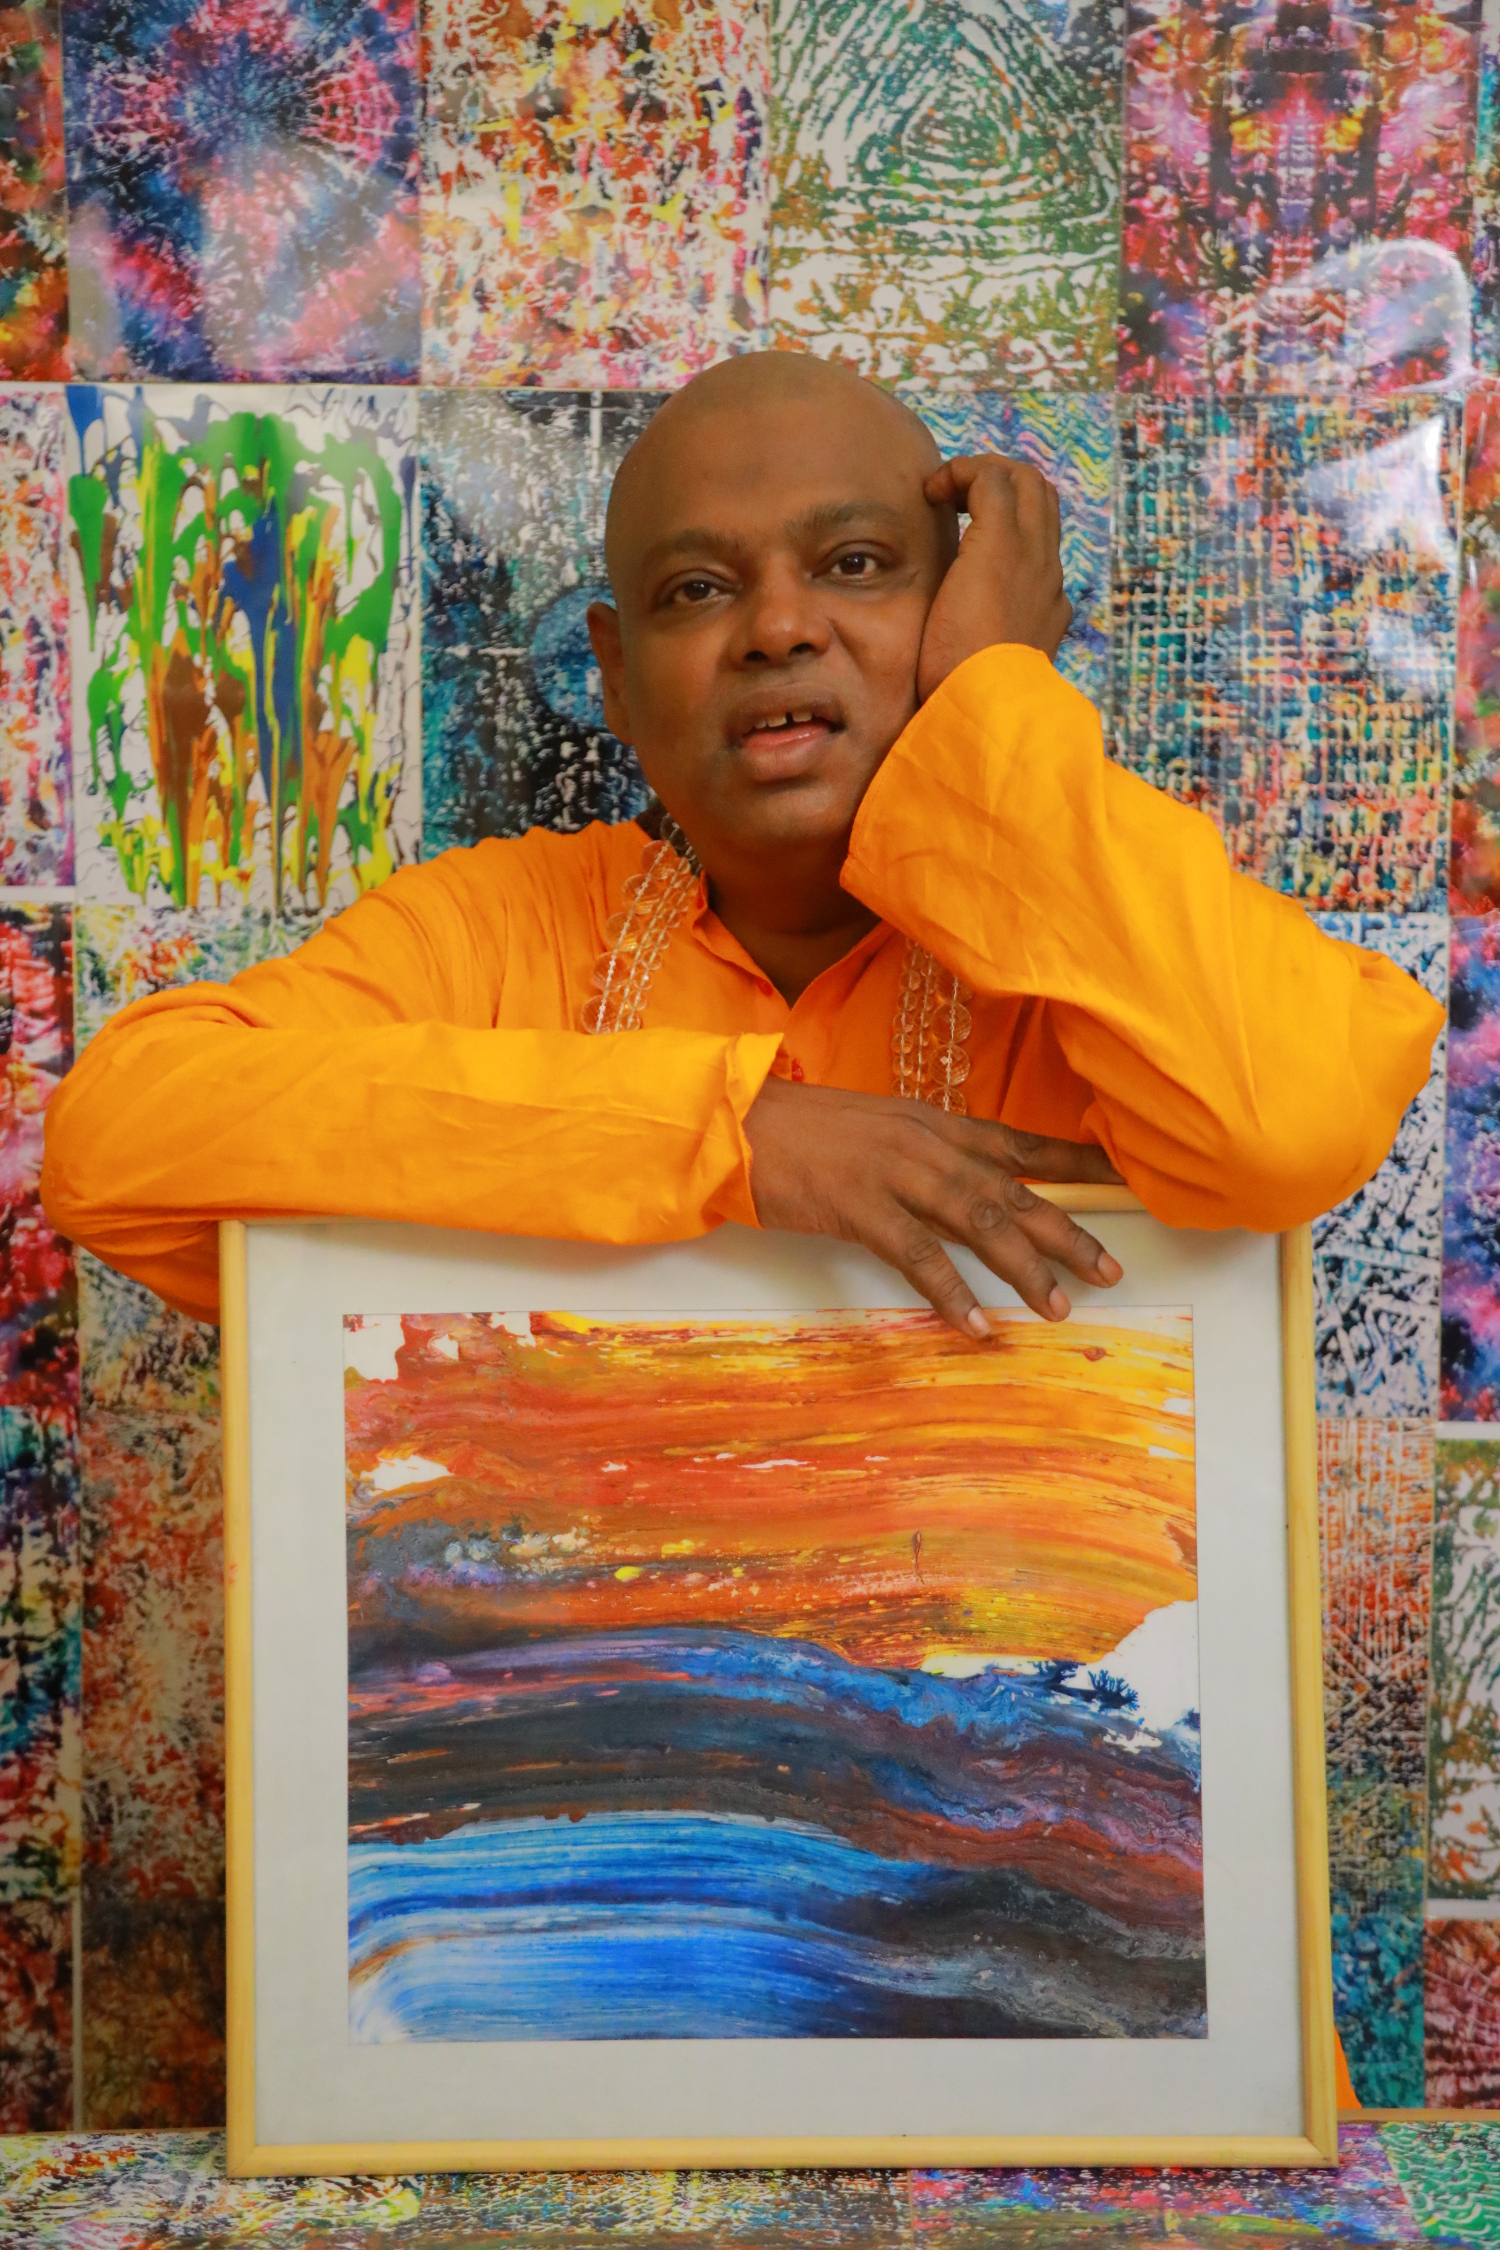 Parijoy Saha with the World's fastest abstract painting made in a 1/5th fraction of a second.